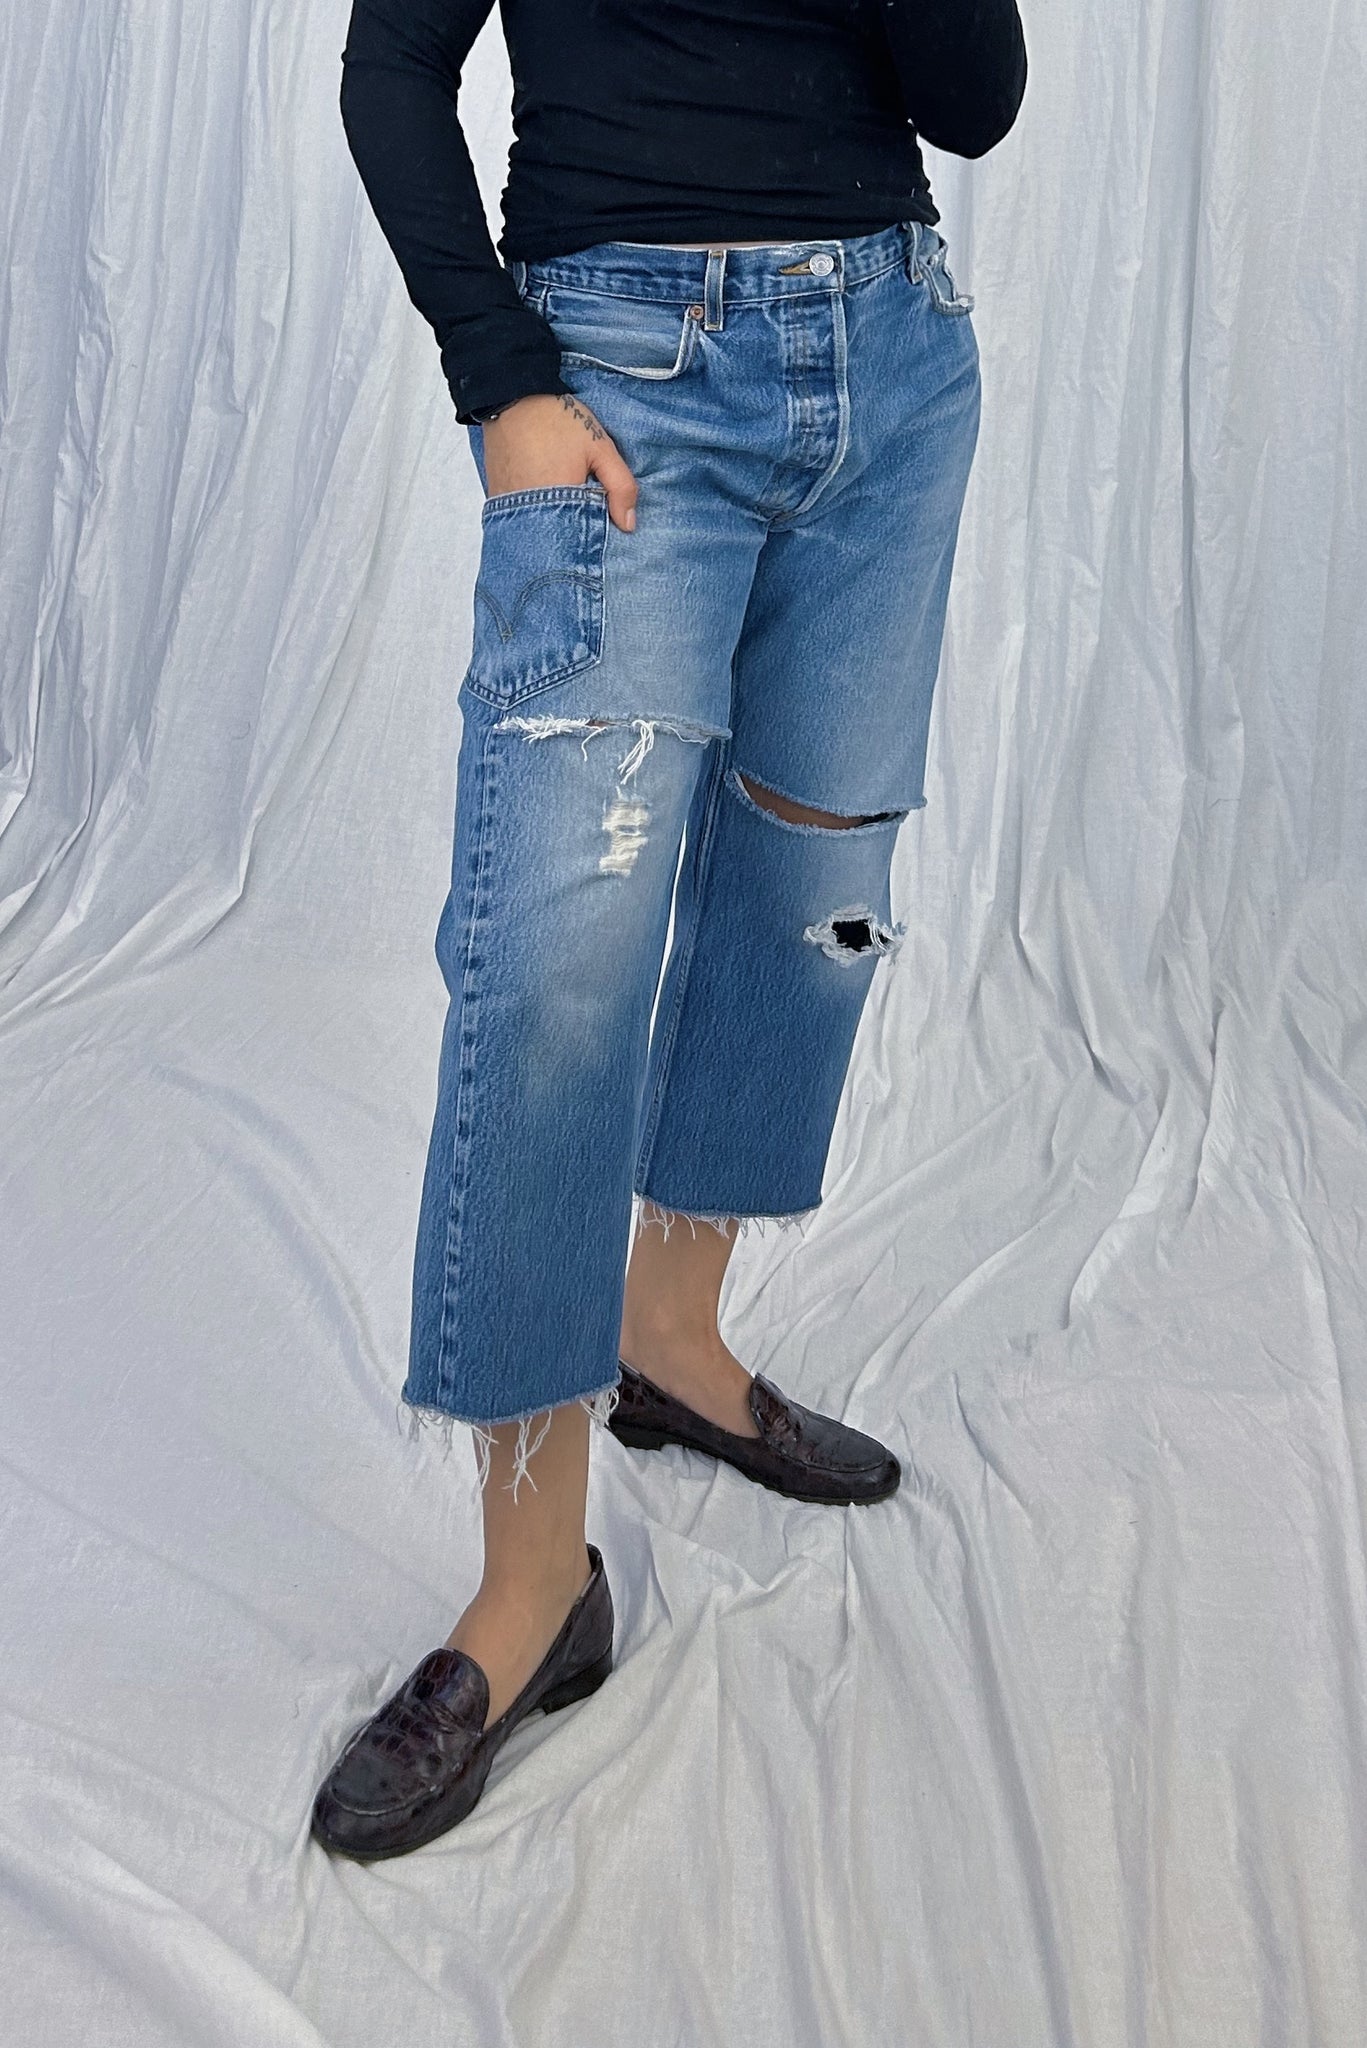 ReShaped Jeans #16